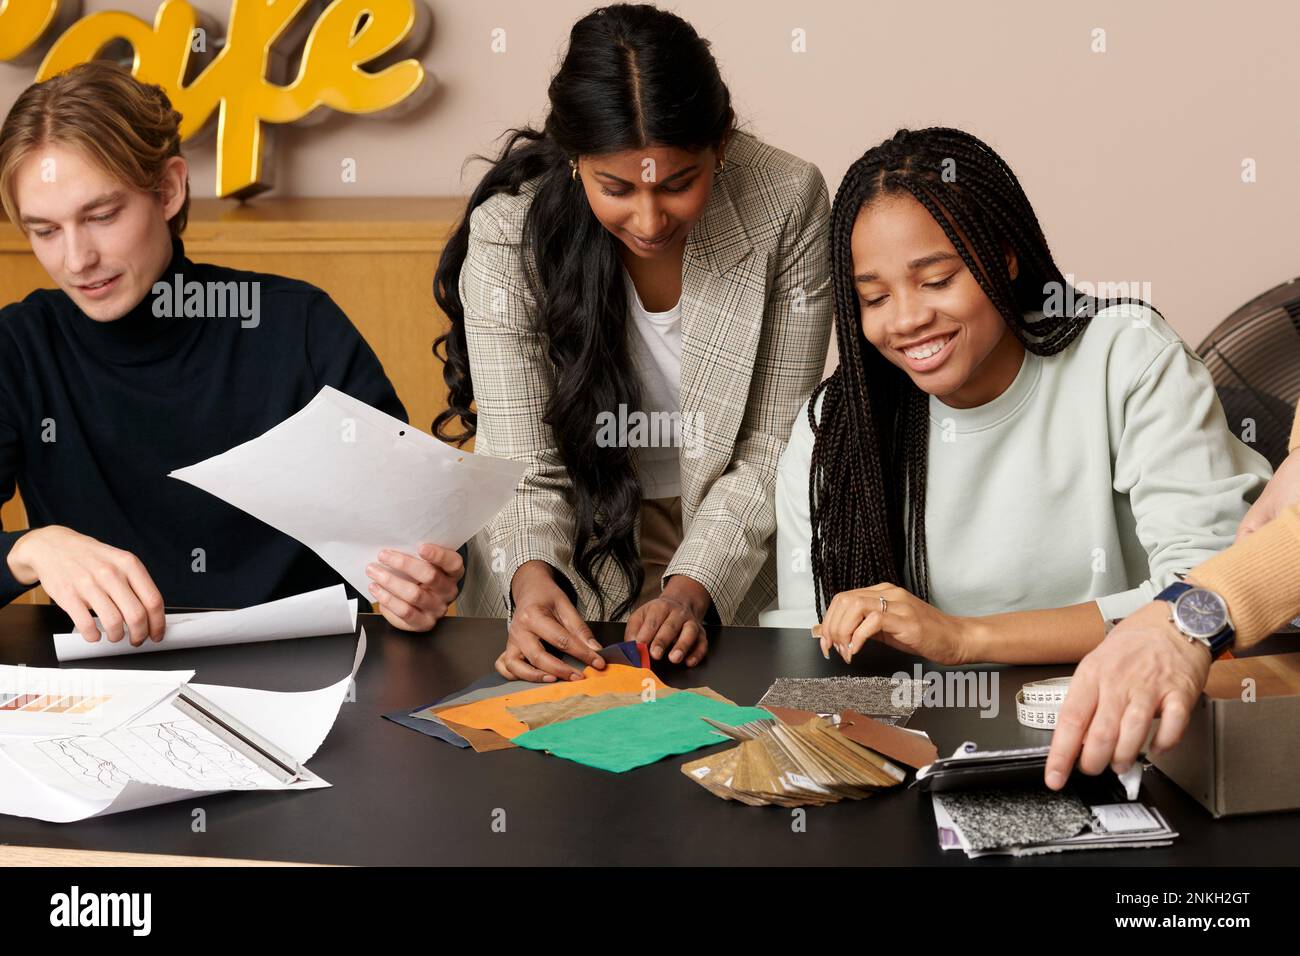 Multiracial fashion designers working together at studio Stock Photo